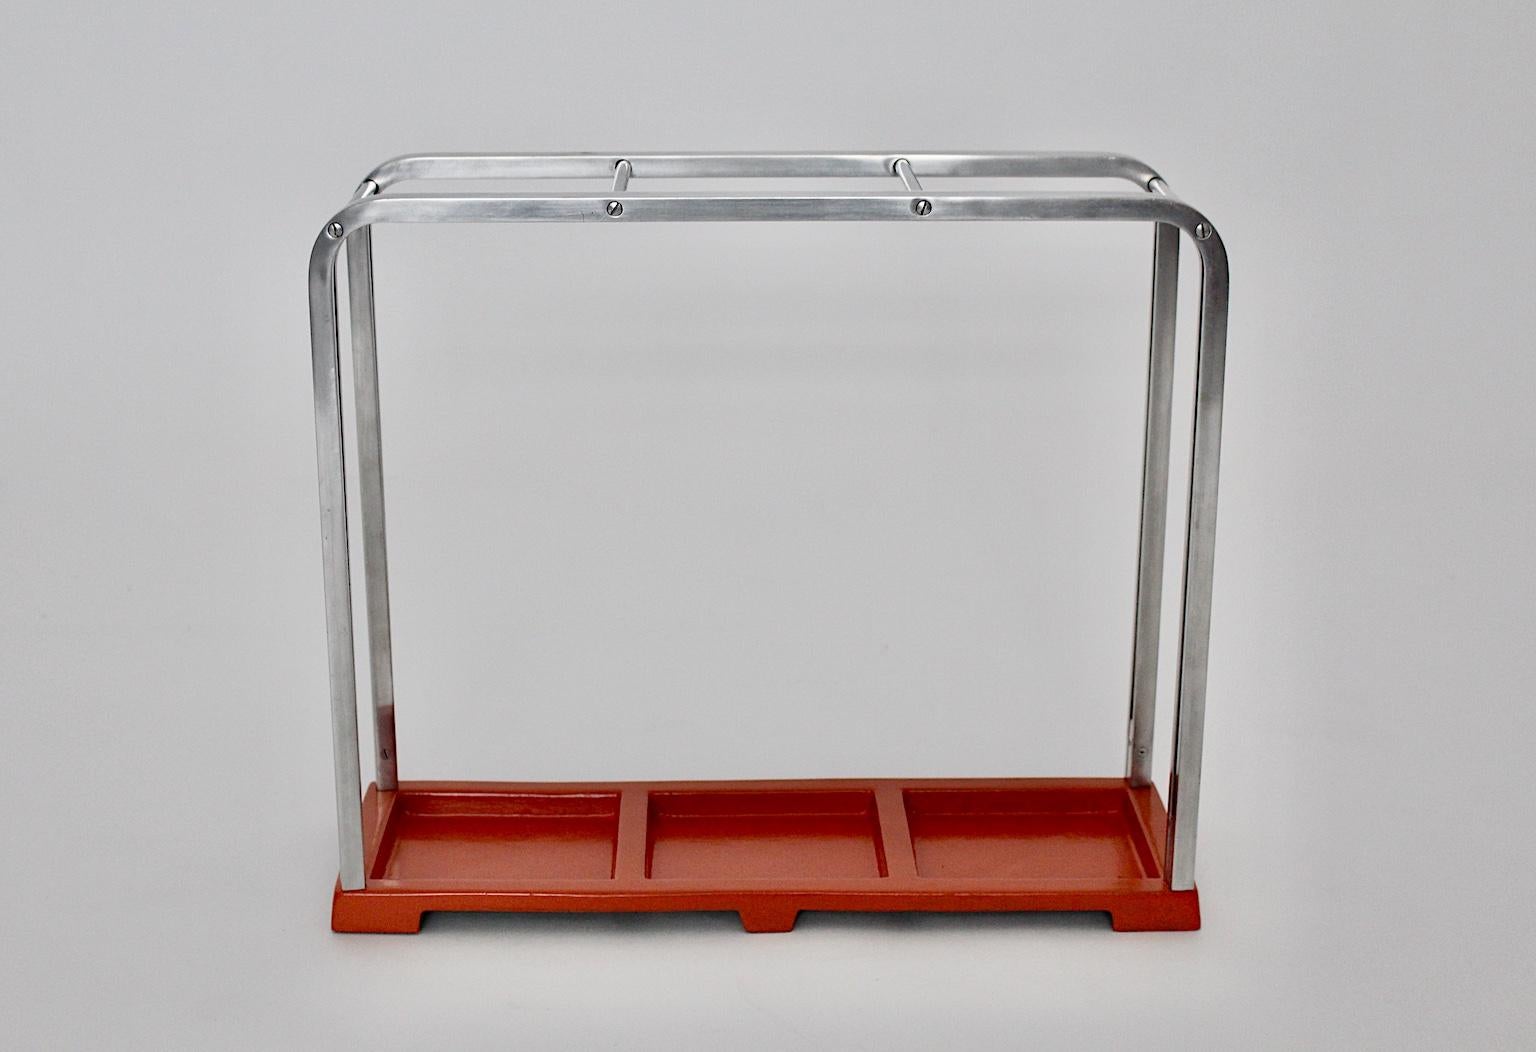 Bauhaus Art Deco Vintage Red Silver Aluminum Umbrella Stand, 1930s, Germany For Sale 4